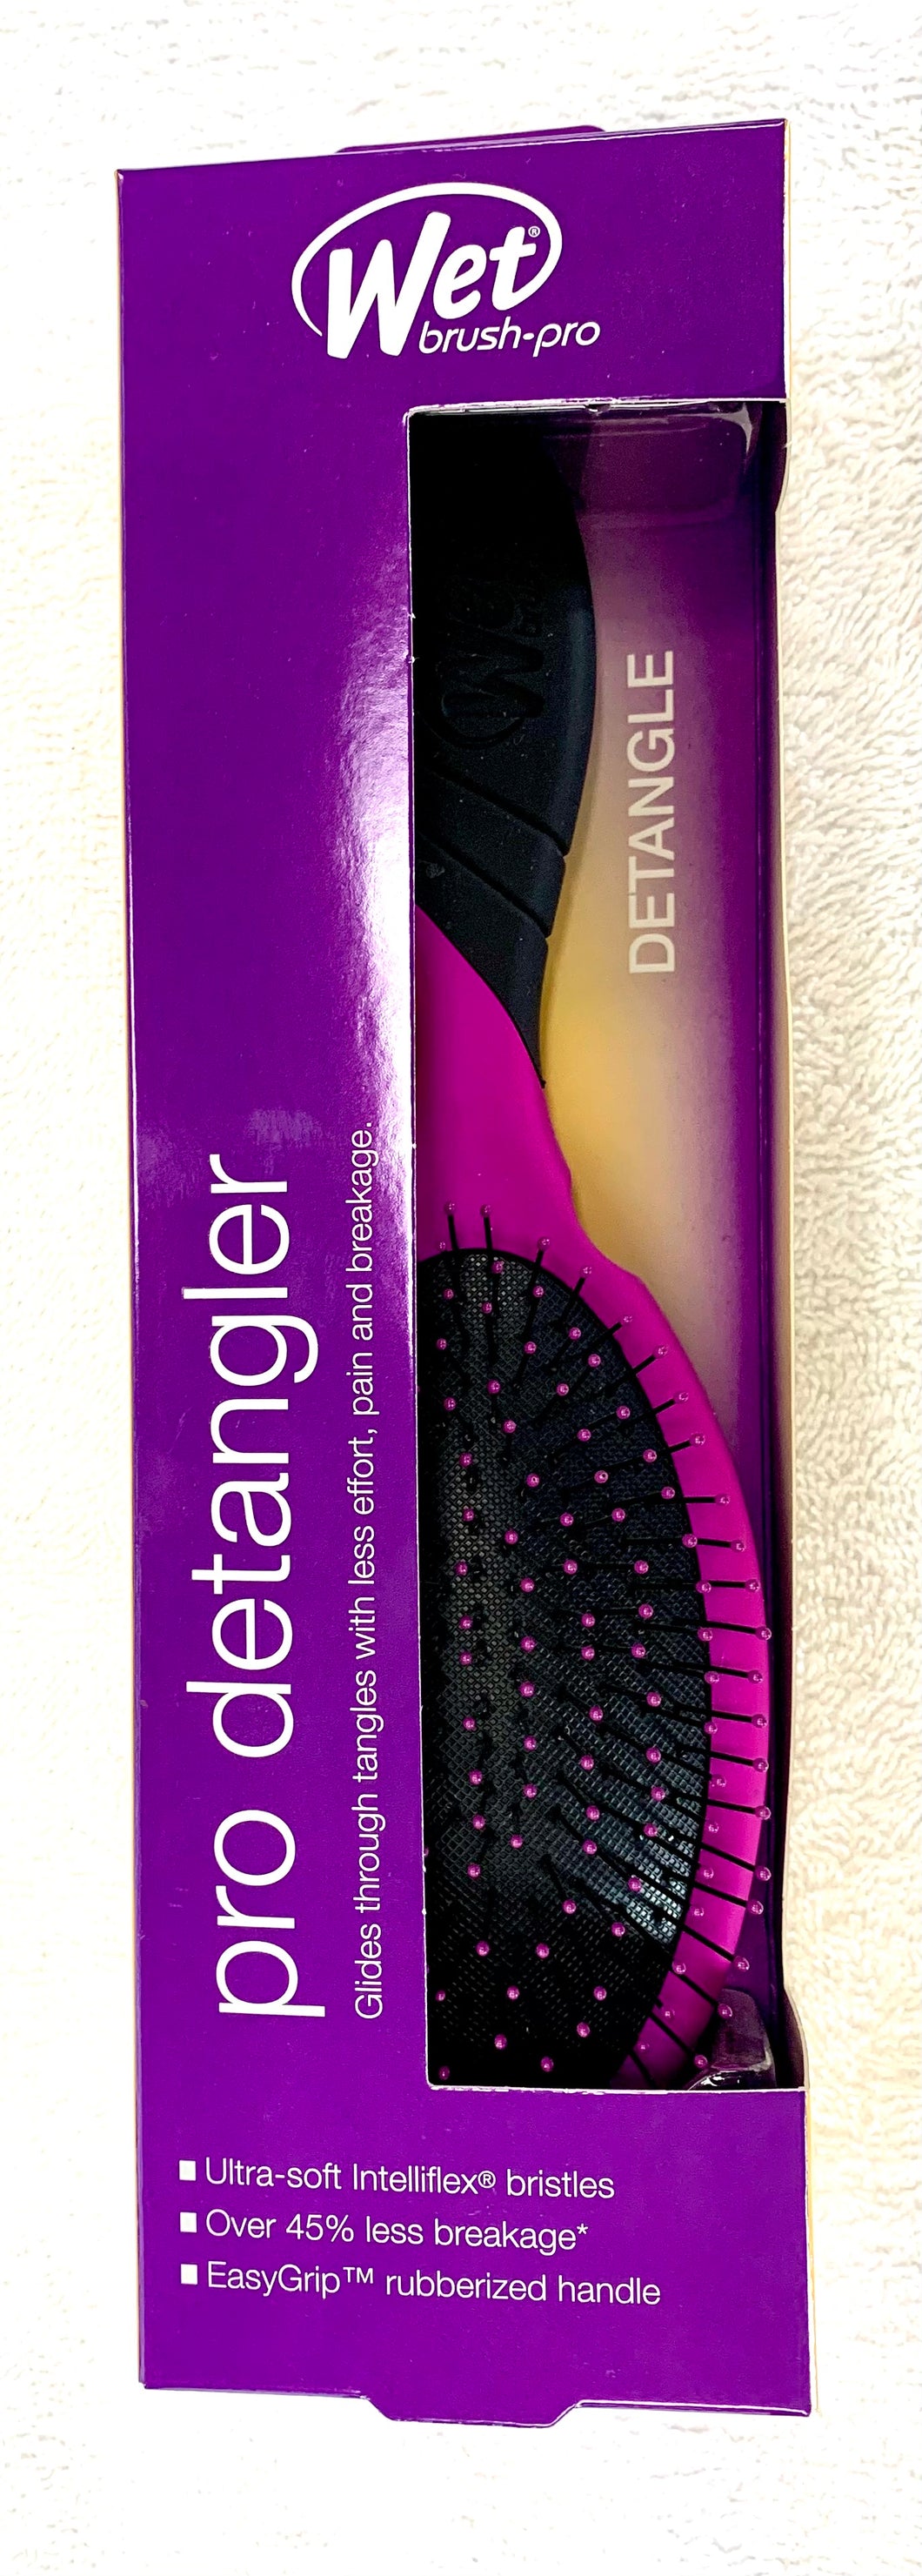 The Wet Brush Pro Detangler works great on wet and dry hair! Perfect for men, women and kids For thick, curly and straight hair Intelliflex Bristles! Also great on extensions. Shown here is fushia 